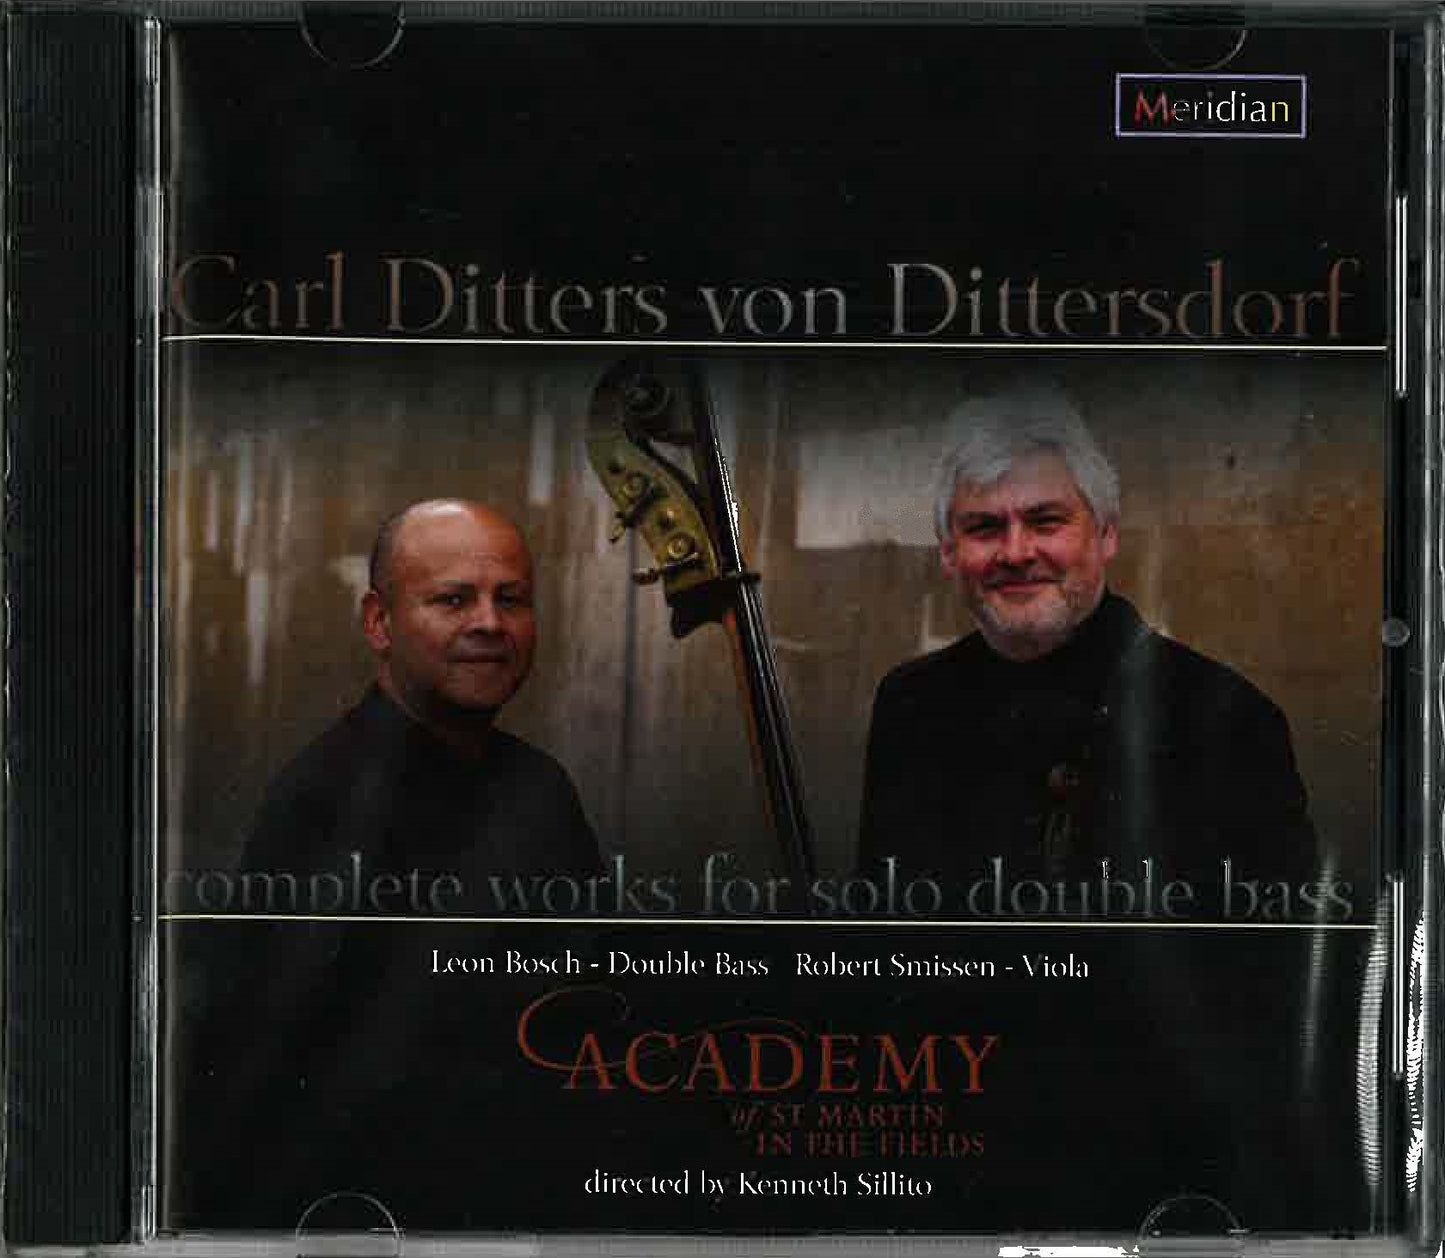 Bosch: Dittersdorf Complete works for solo double bass